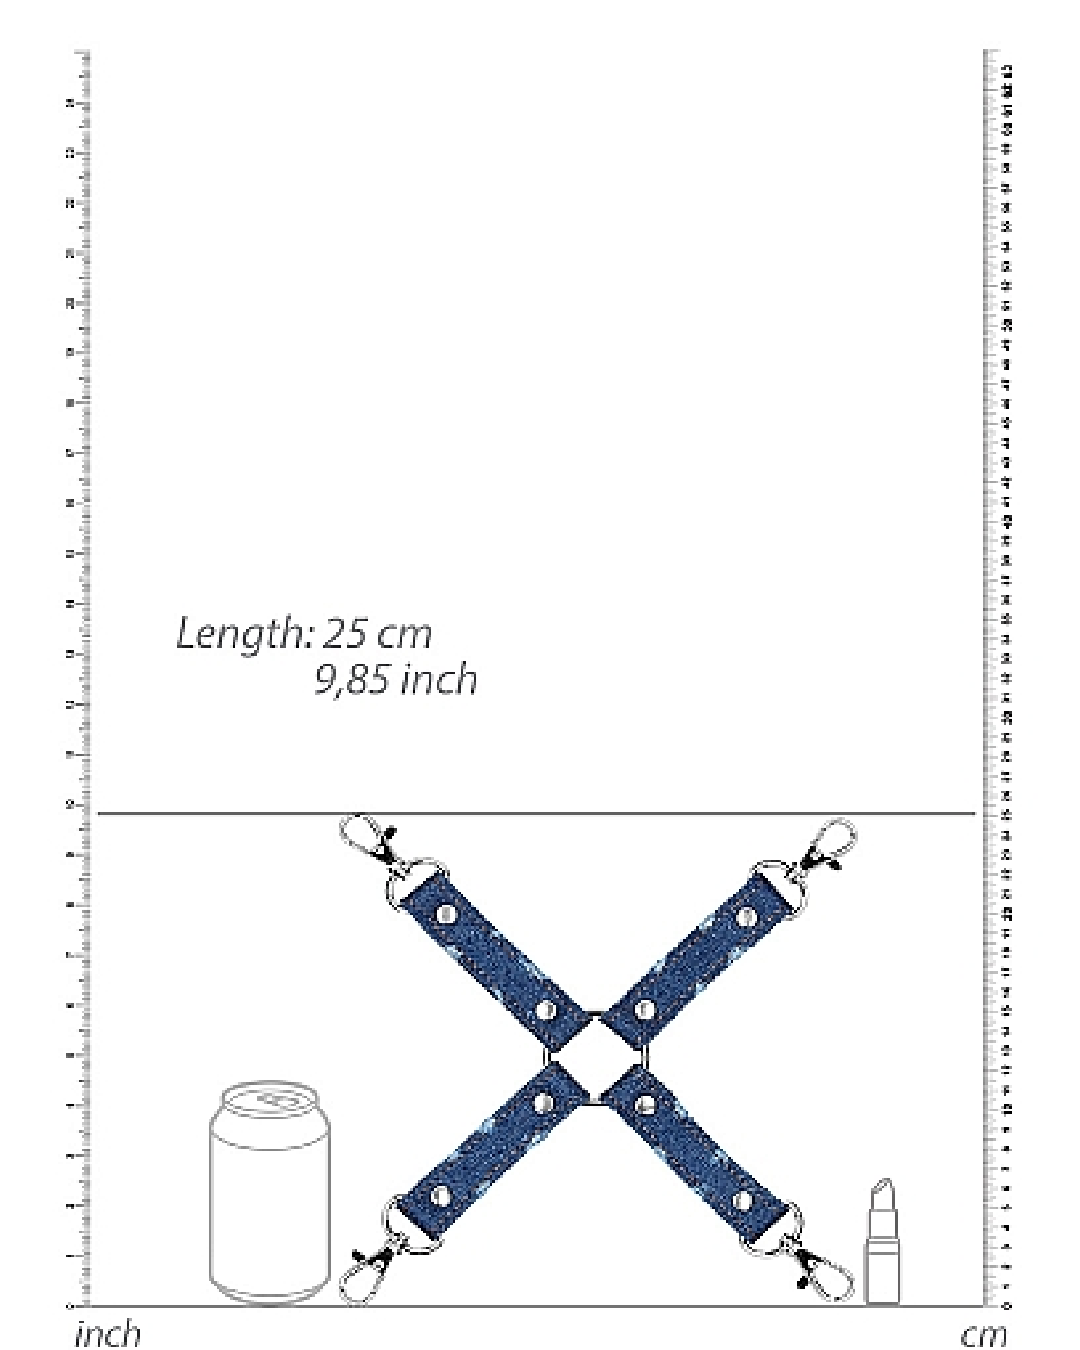 Ouch!  Roughend Denim Style Hogtie  - Blue graphic showing dimensions of product 